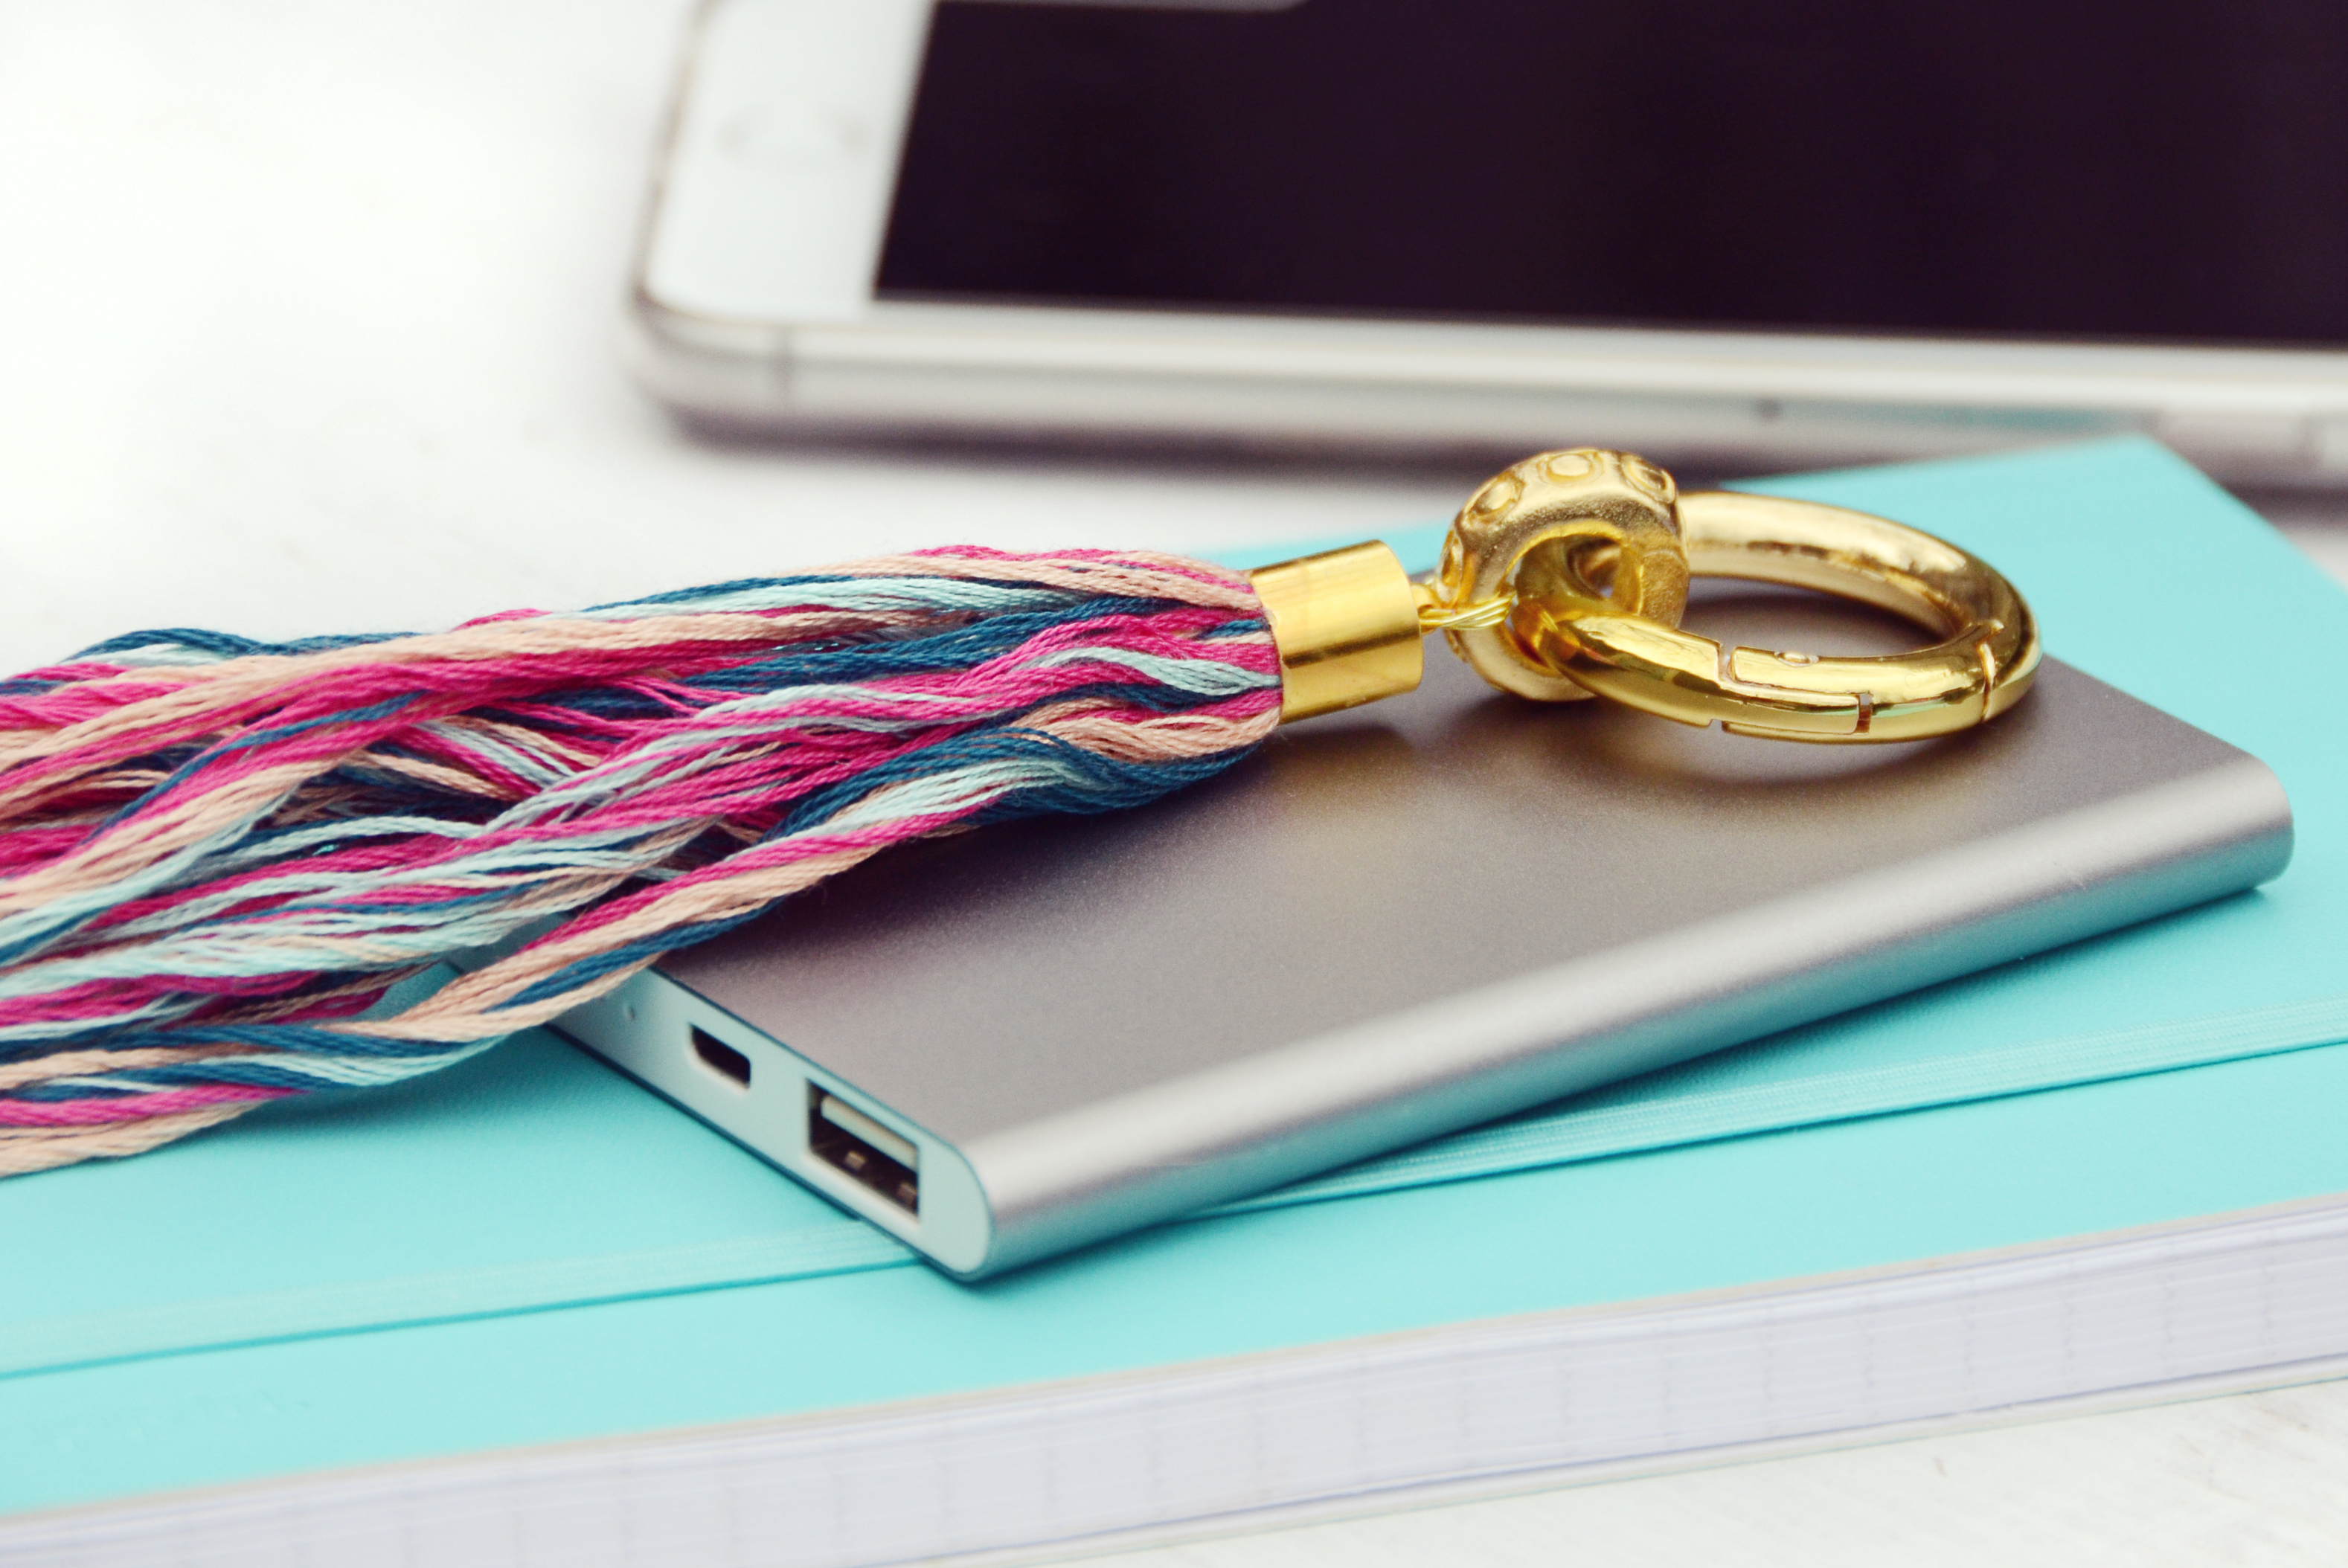 Easy DIY Phone Charging Cable Tassel | A Colorful Craft Project by Faith Towers Provencher of Design Fixation